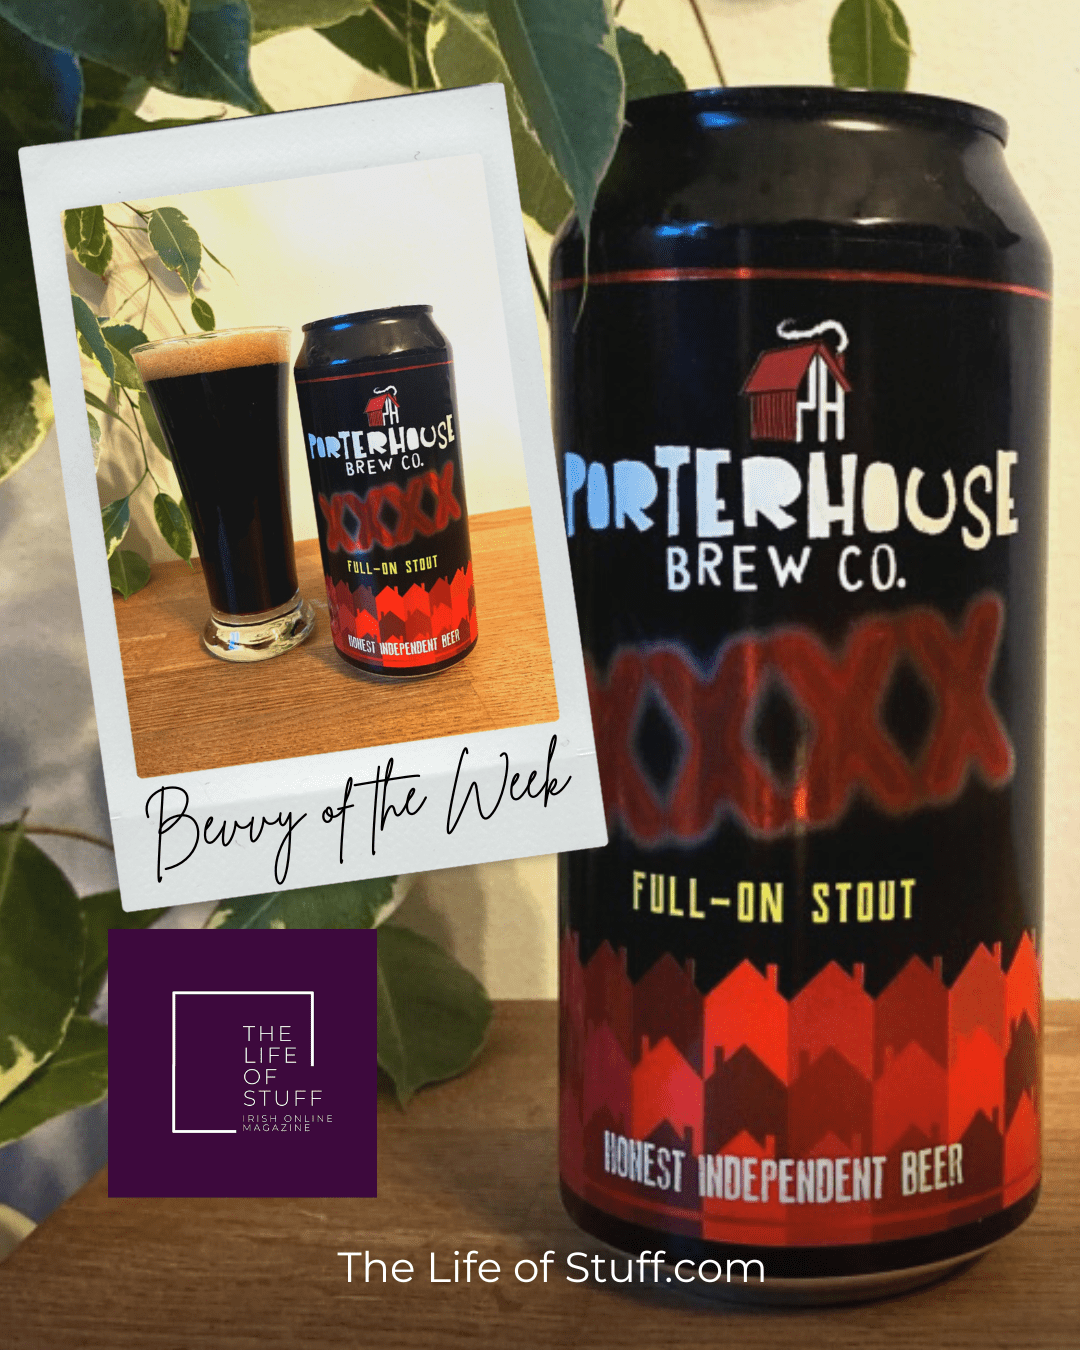 Bevvy of the Week - Porterhouse XXXX Full On Stout - The Life of Stuff